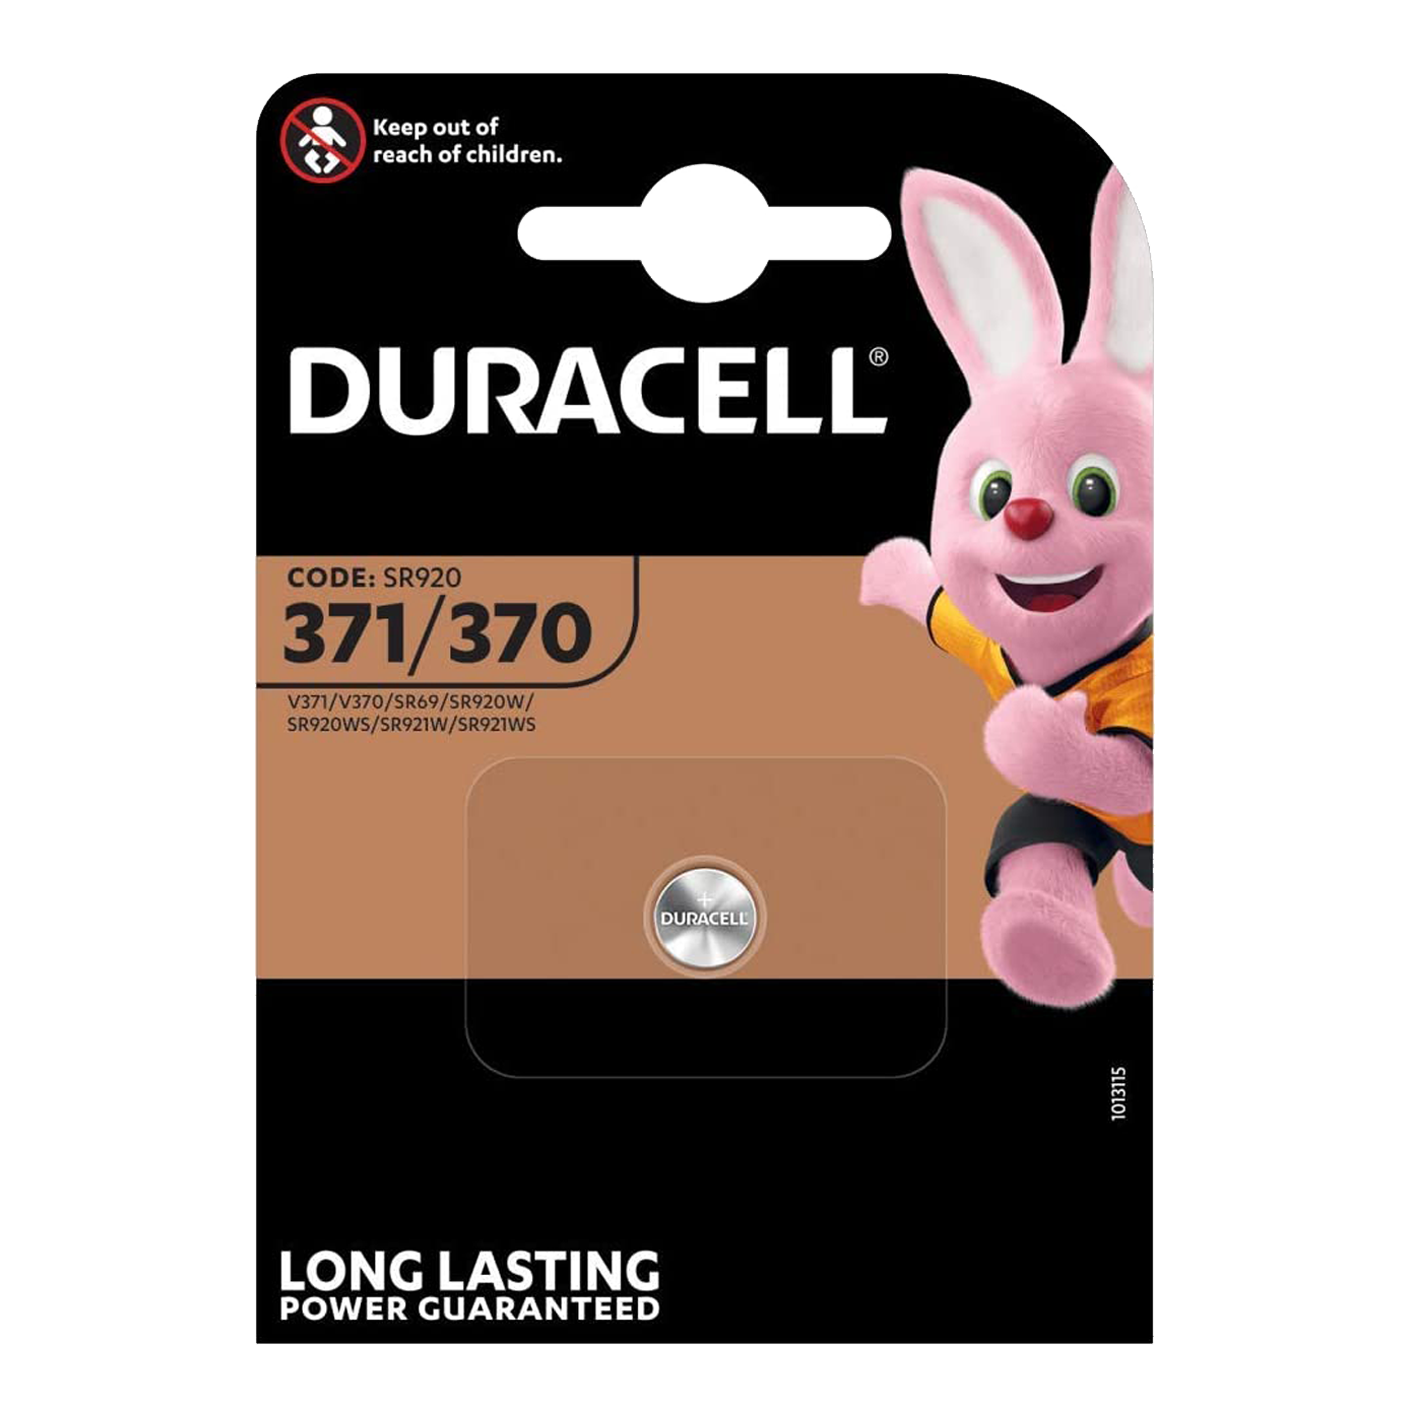 Duracell 371/370 1.5V Silver Oxide, Pack of 1